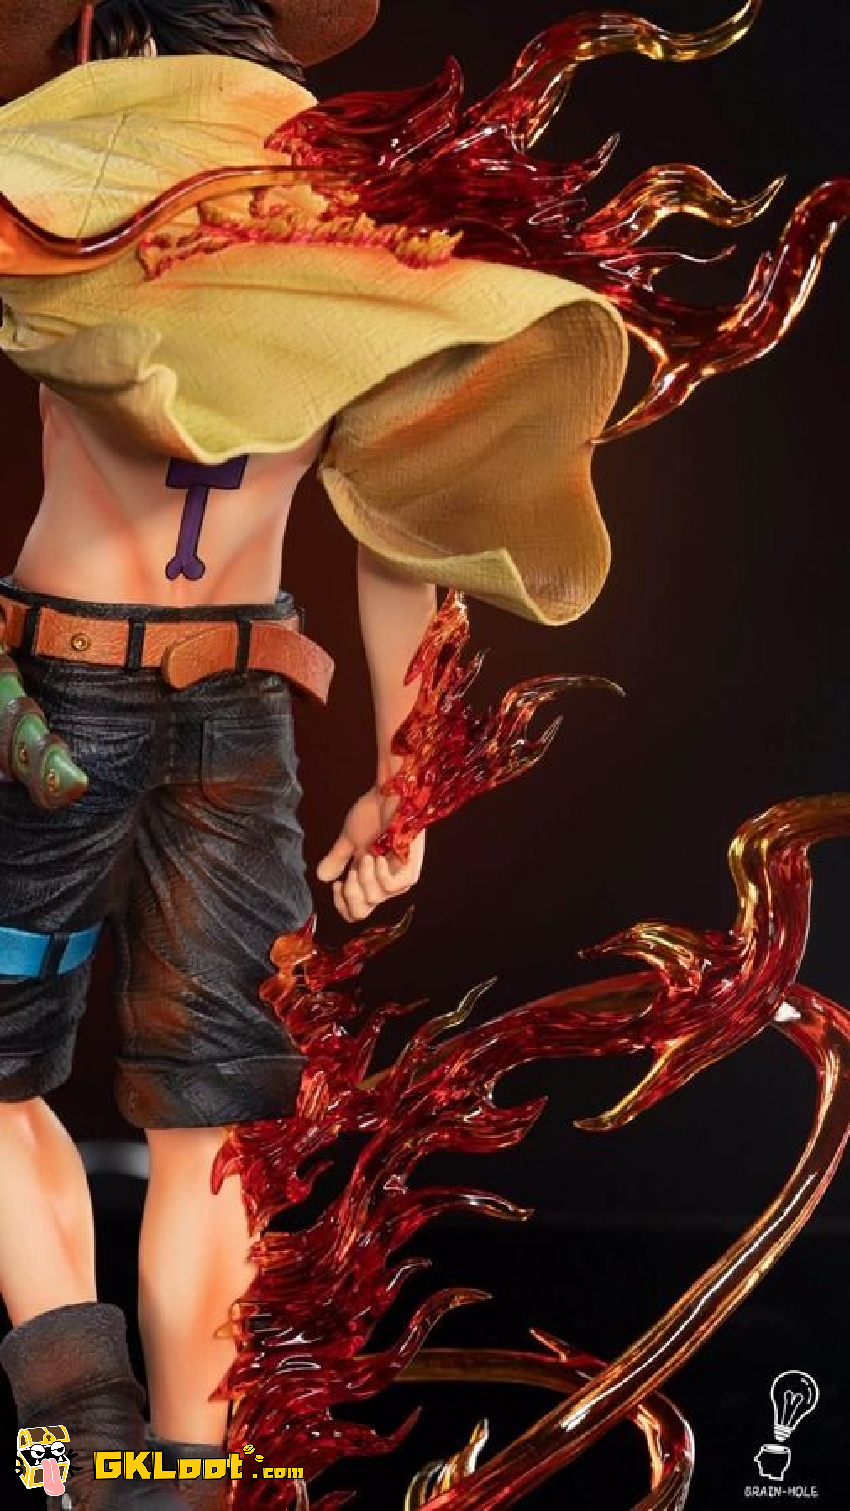 [Out of stock] Brain Hole Studio One Piece Portgas·D·Ace Statue